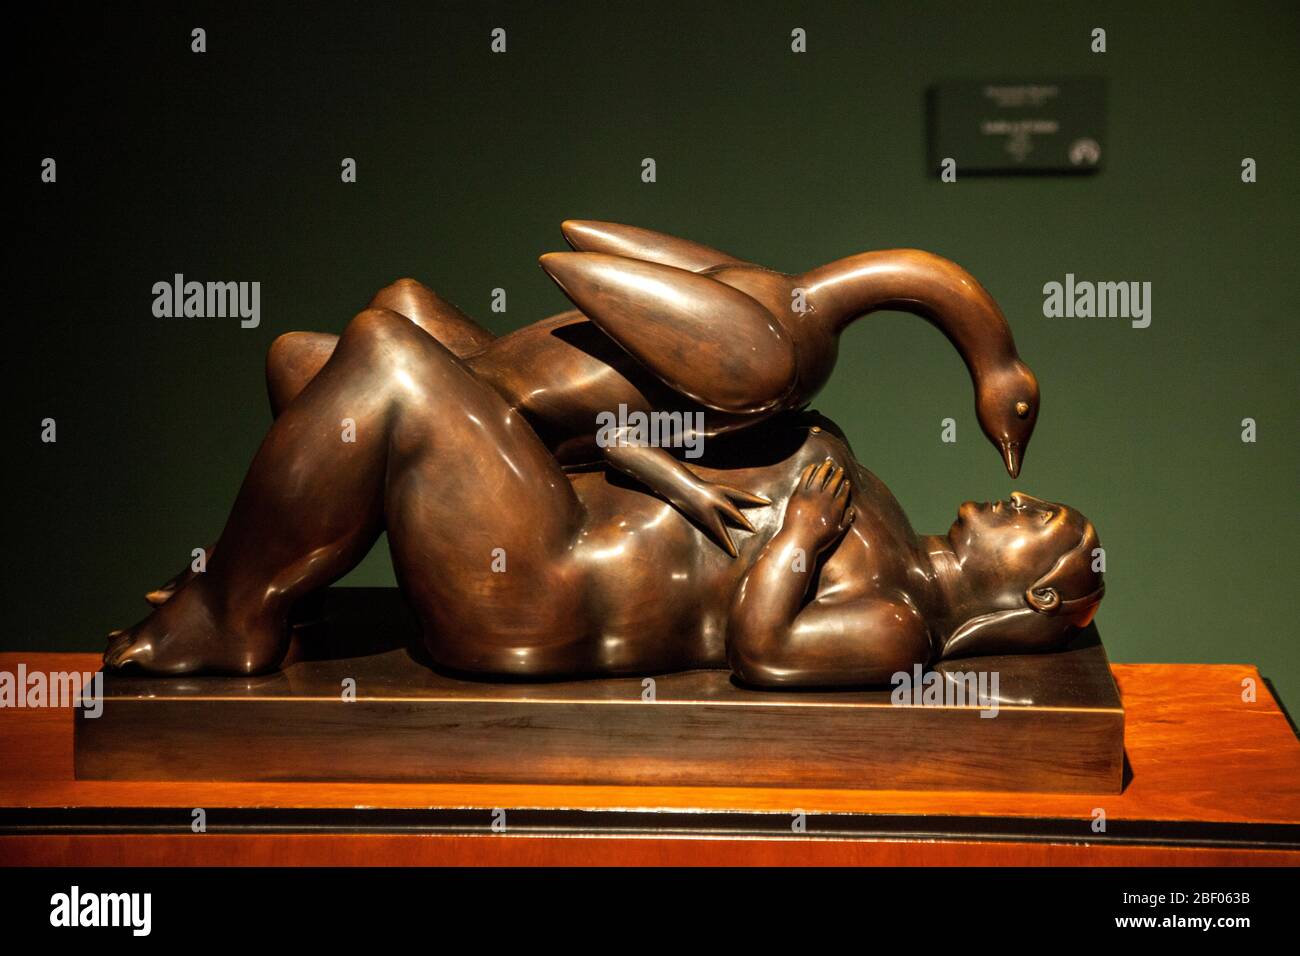 Leda and the Swan, Greek mythology in which the god Zeus, in the form of a swan, seduces  Leda bronze by Botero at the Botero Museum, Bogota, Colombia Stock Photo